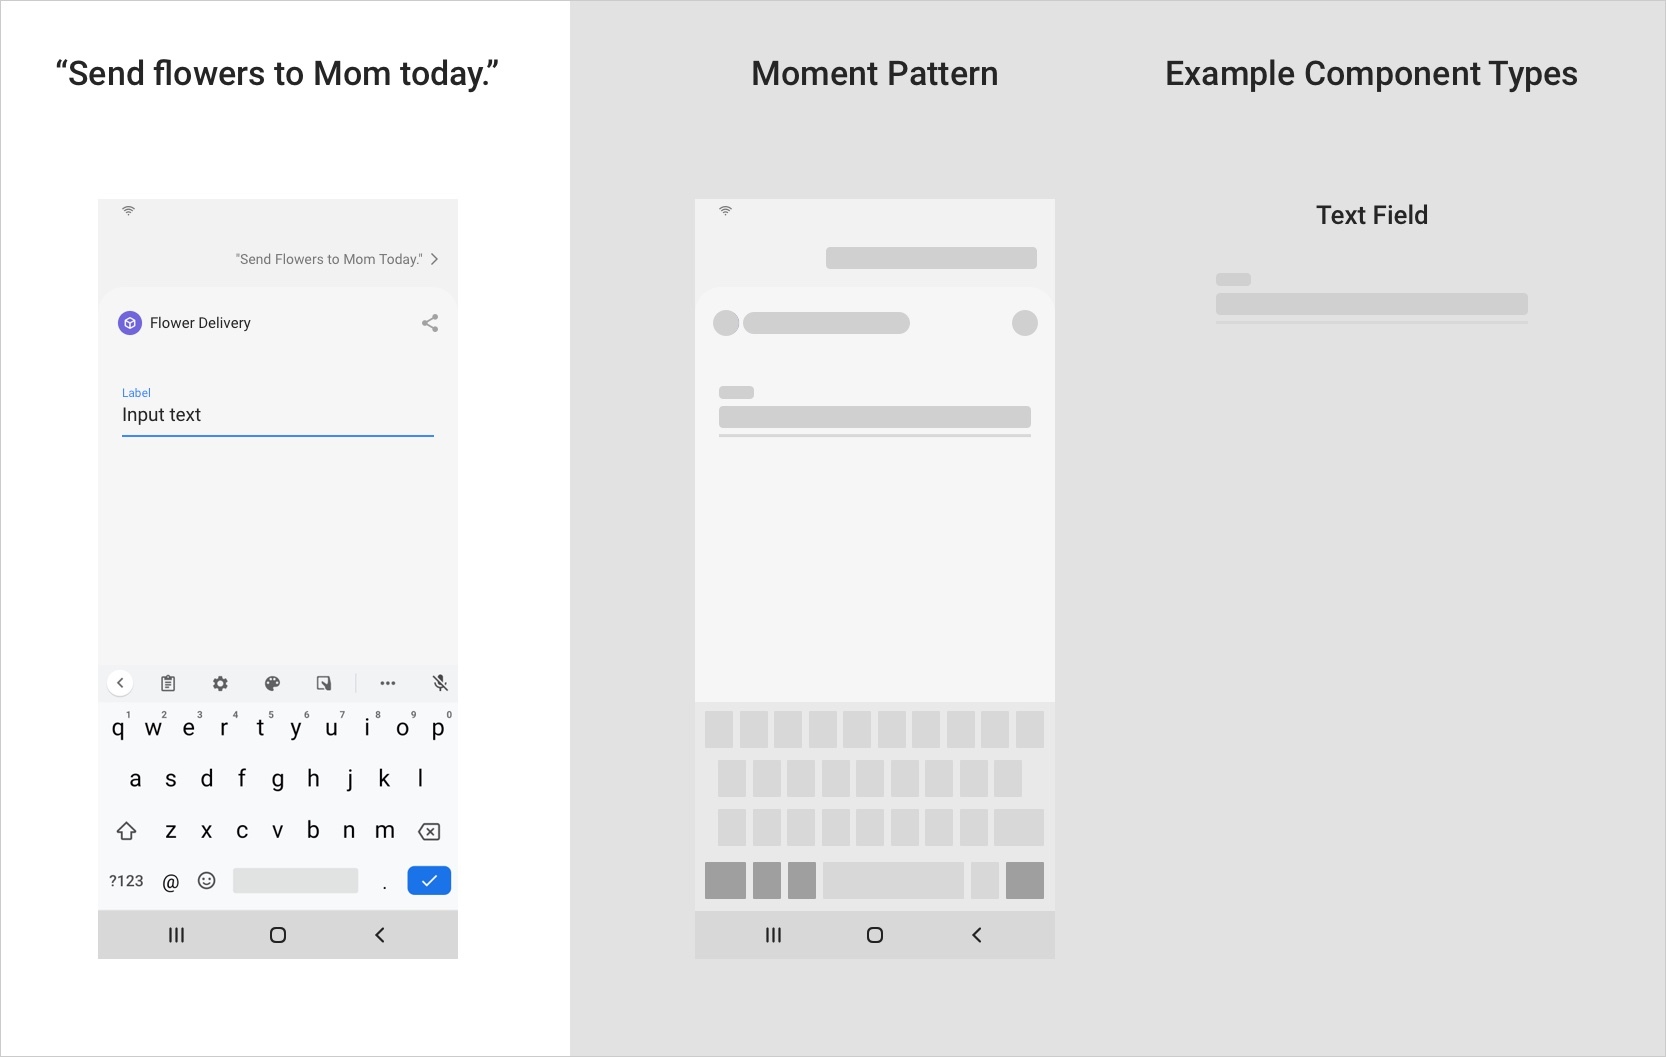 Or, in response to the request "Send flowers to mom today", Bixby could ask "What is the delivery address?" and present a text field for the user to type the address.